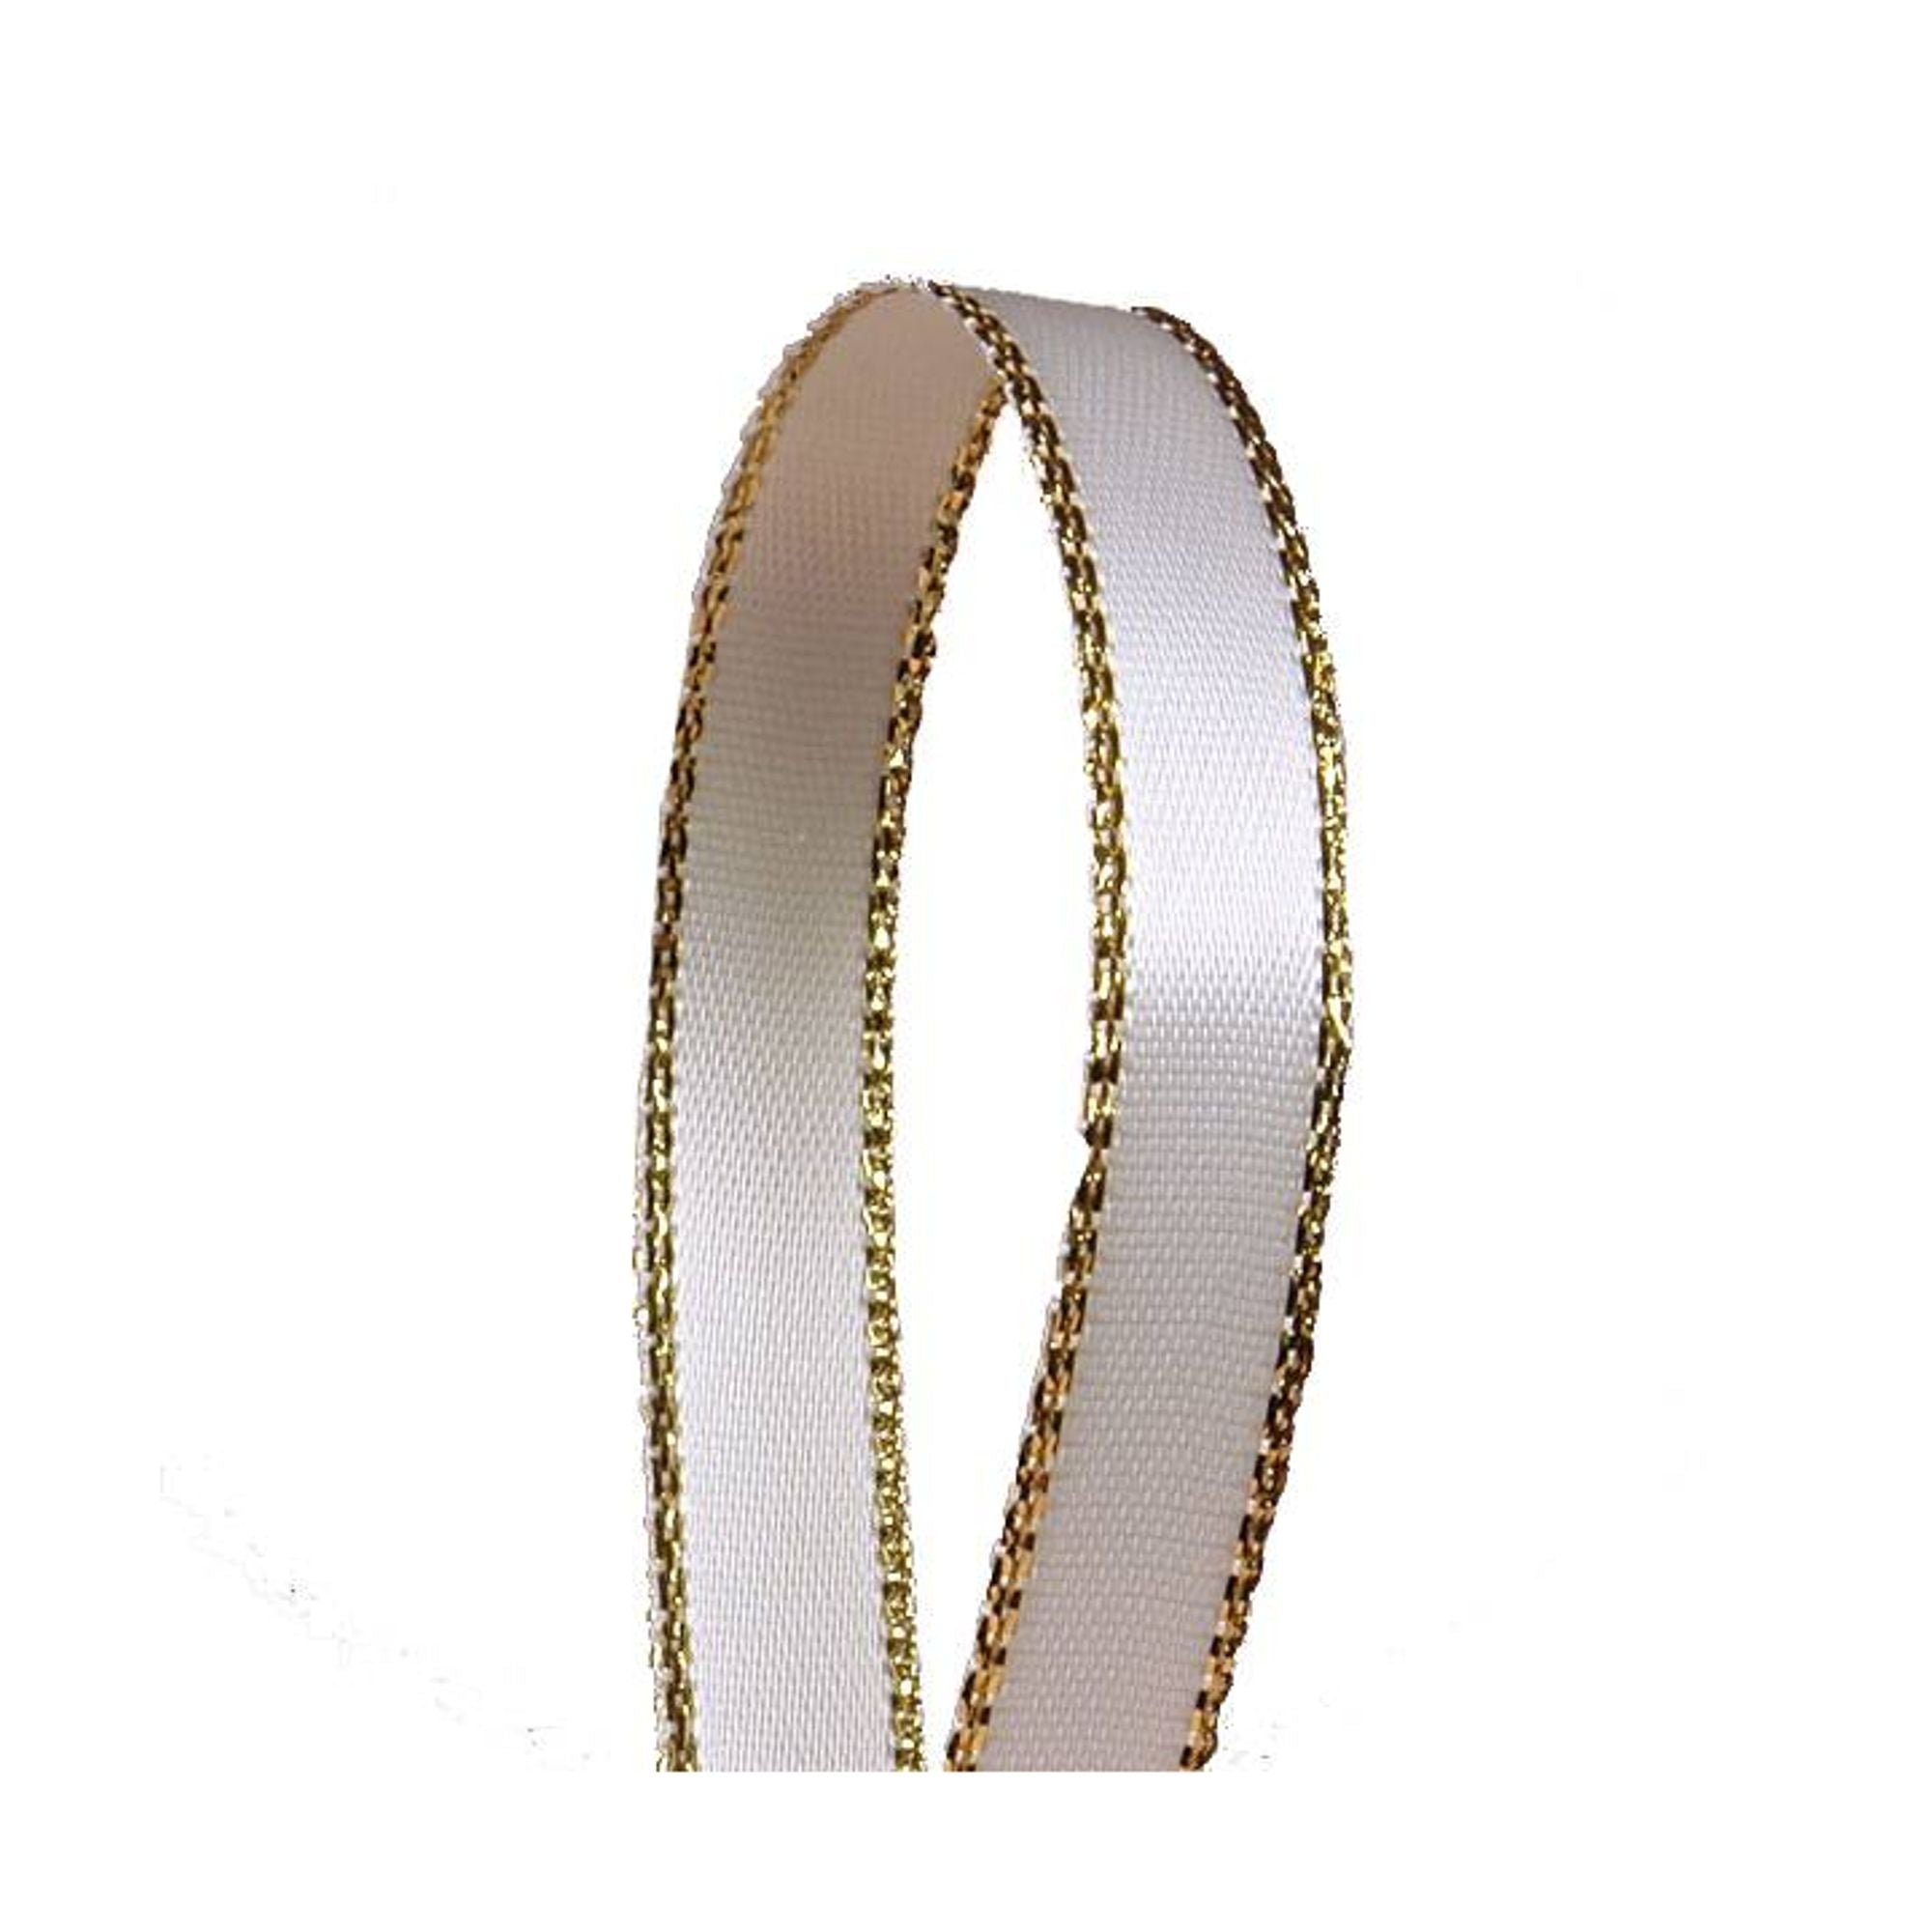 Antique Gold Satin Ribbon with Gold Edges, 3/8 X 50Yd